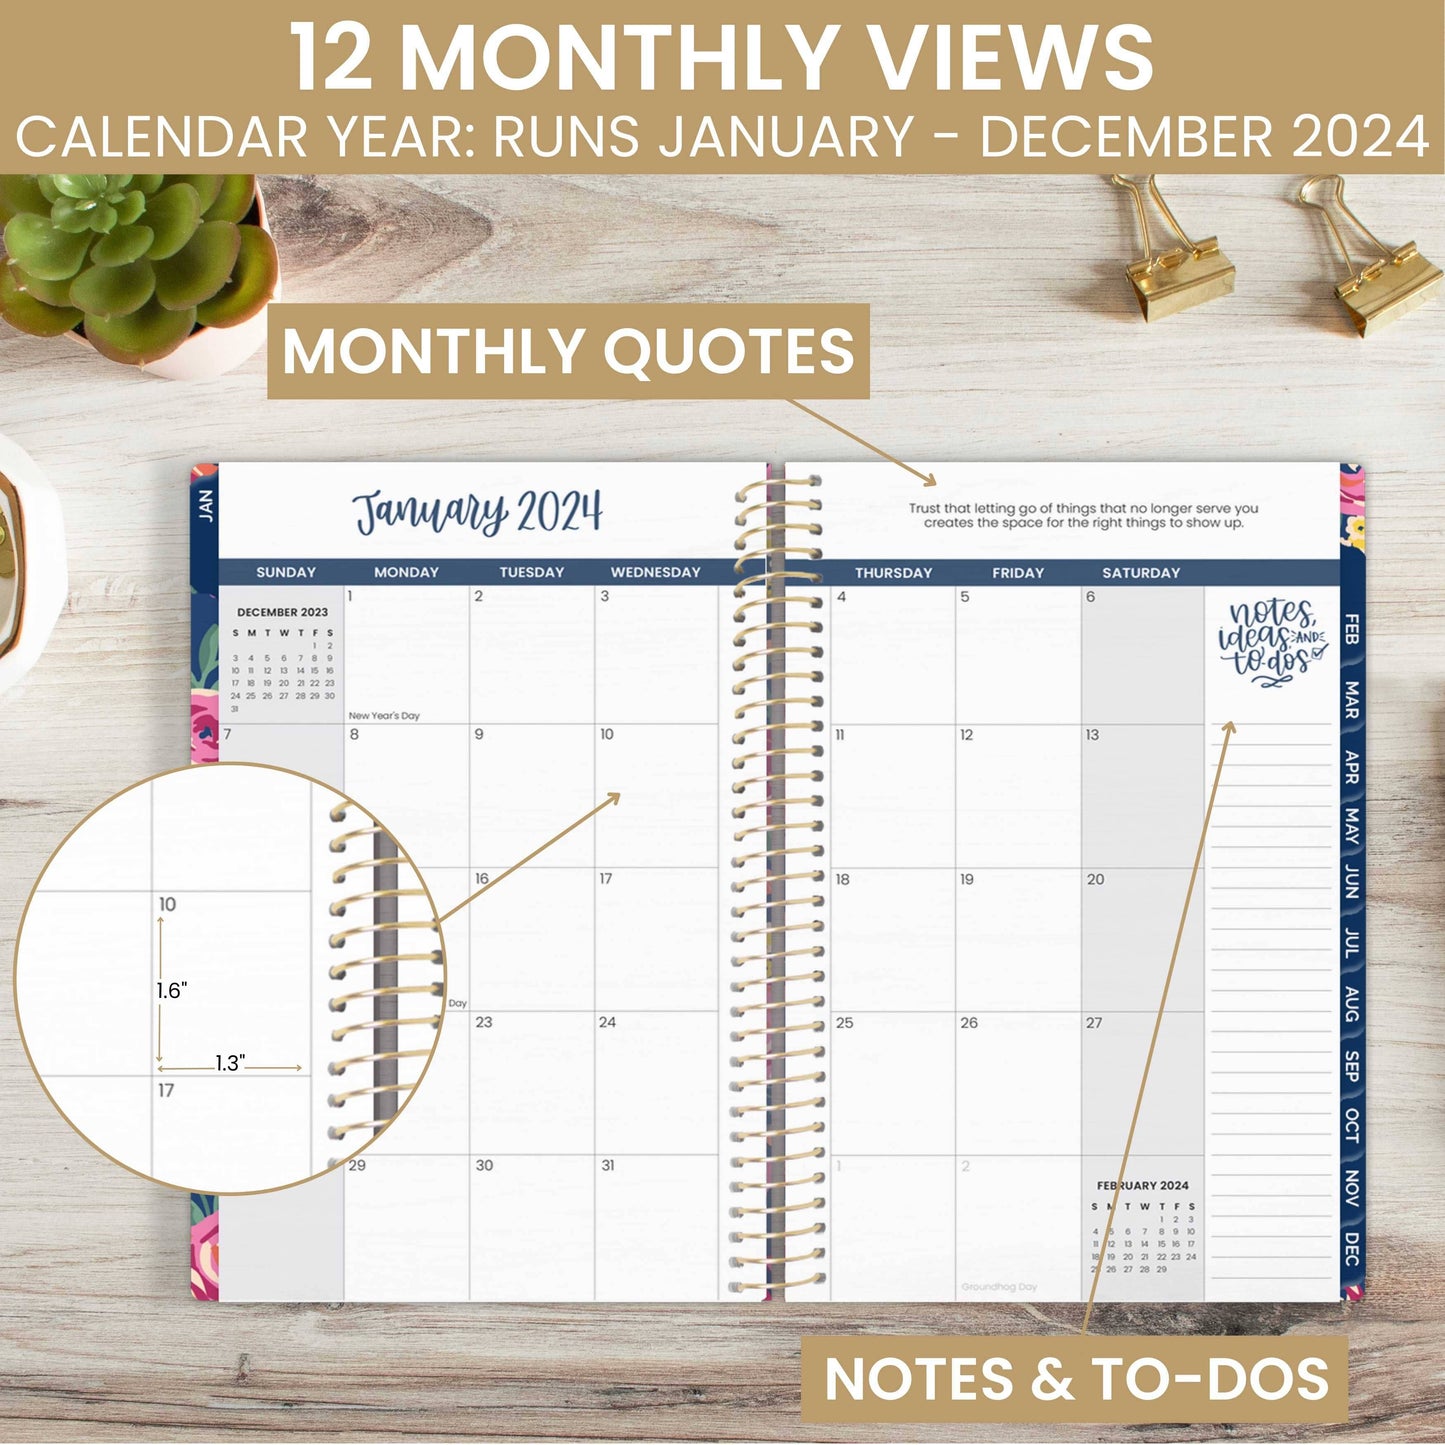 Calendar Year 5x8 Soft Cover Planners - Choose Design: Blue Earthy Abstract Core bloom daily planners